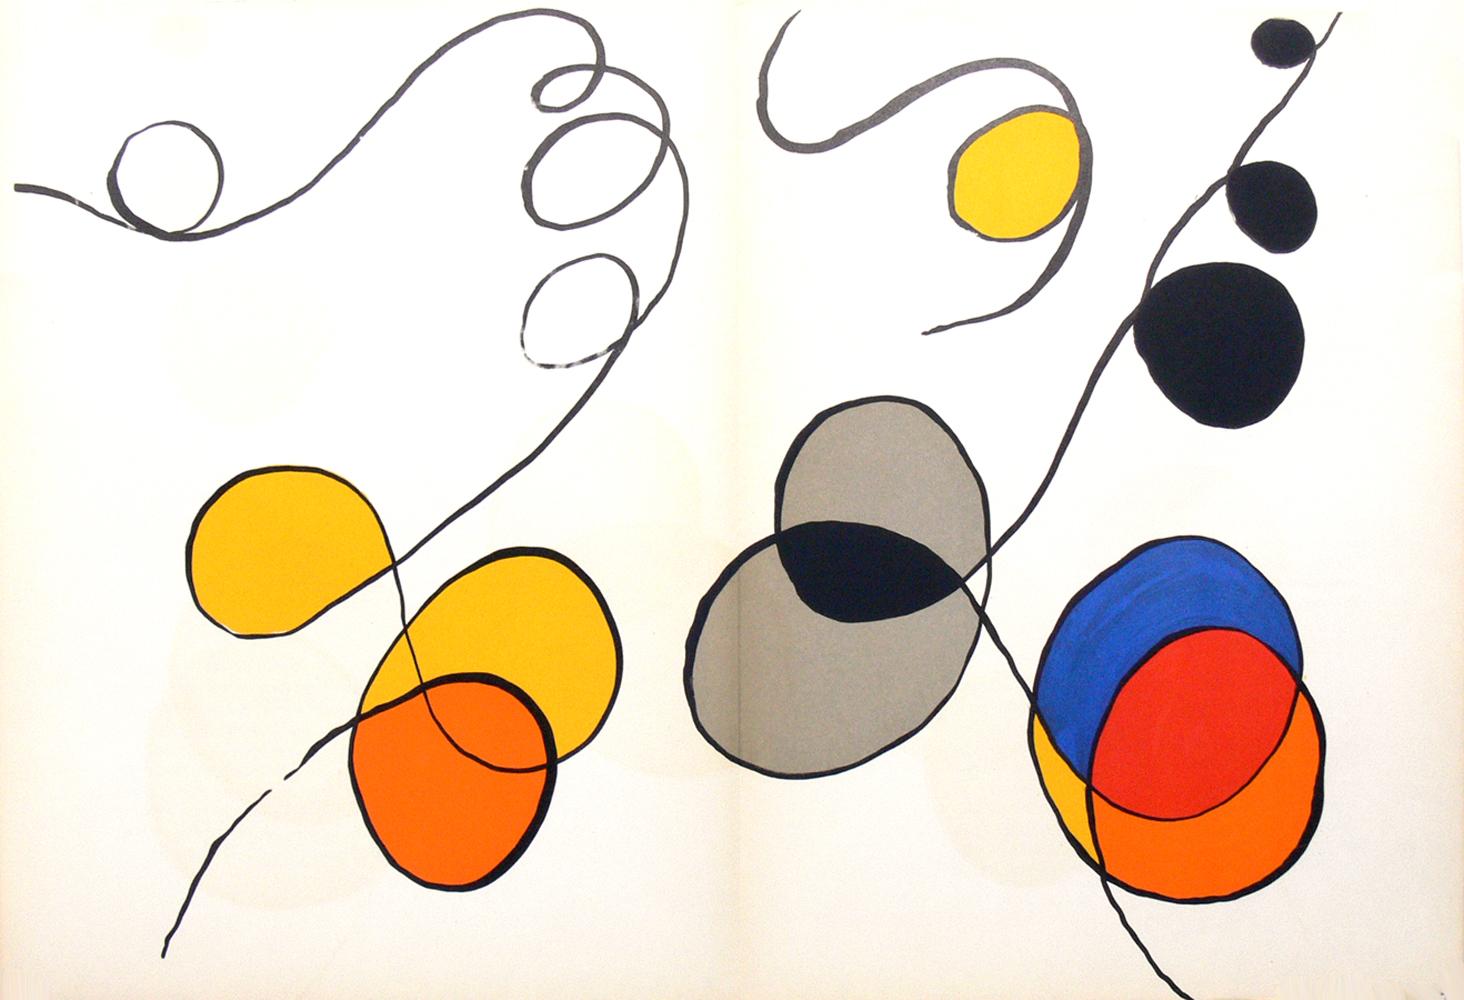 Selection of Alexander Calder color lithographs, France, circa 1960s. We purchased a group of these color lithographs from the estate of a couple that lived in France from 1951-1983. These are most likely from the limited edition folio “Derriere Le